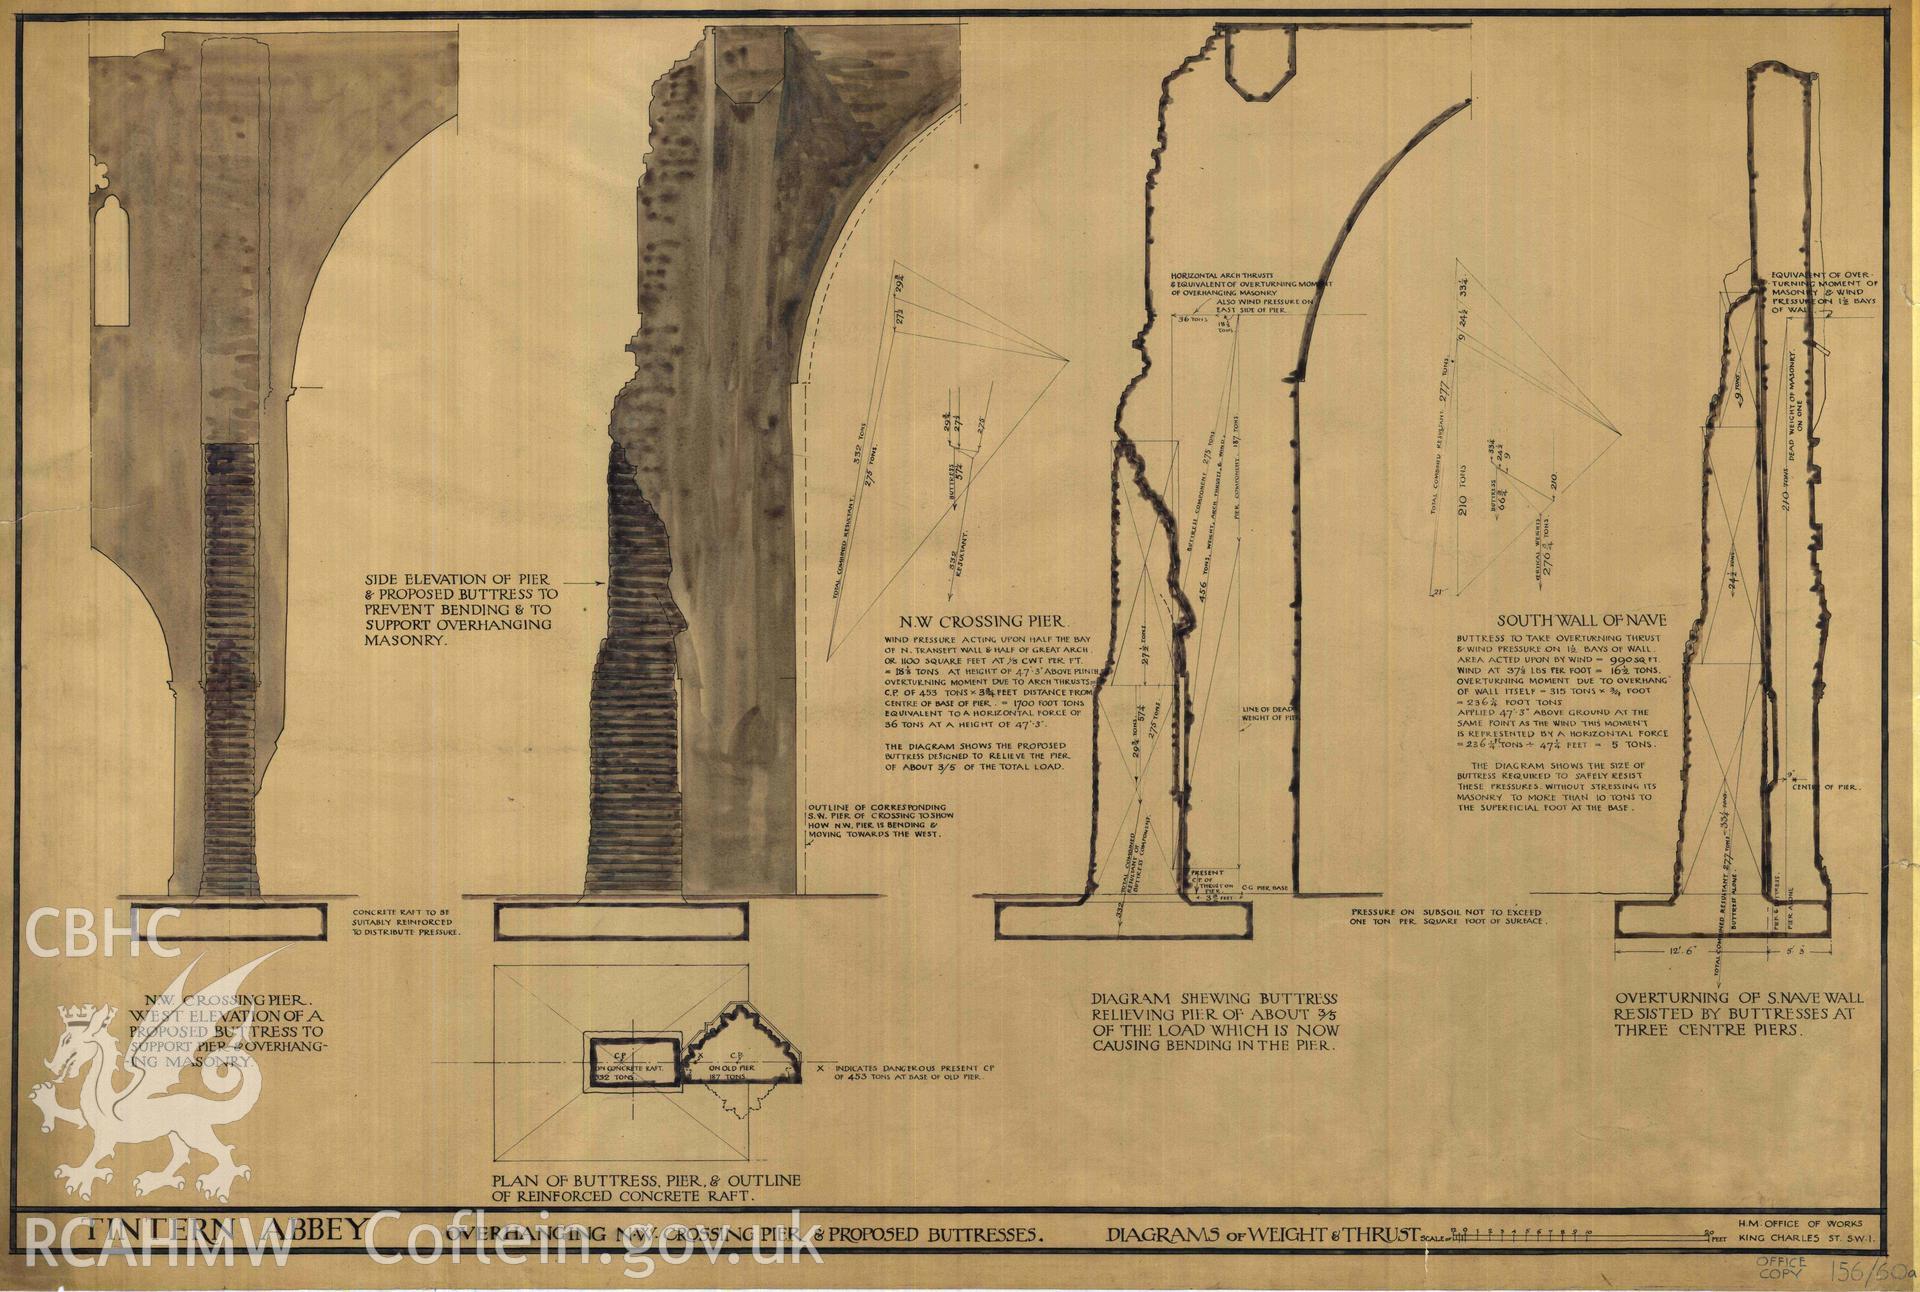 Cadw guardianship monument drawing of Tintern Abbey. Proposed Buttresses NW Crossing. Cadw ref. No. 156/60/a. Scale 1:20.